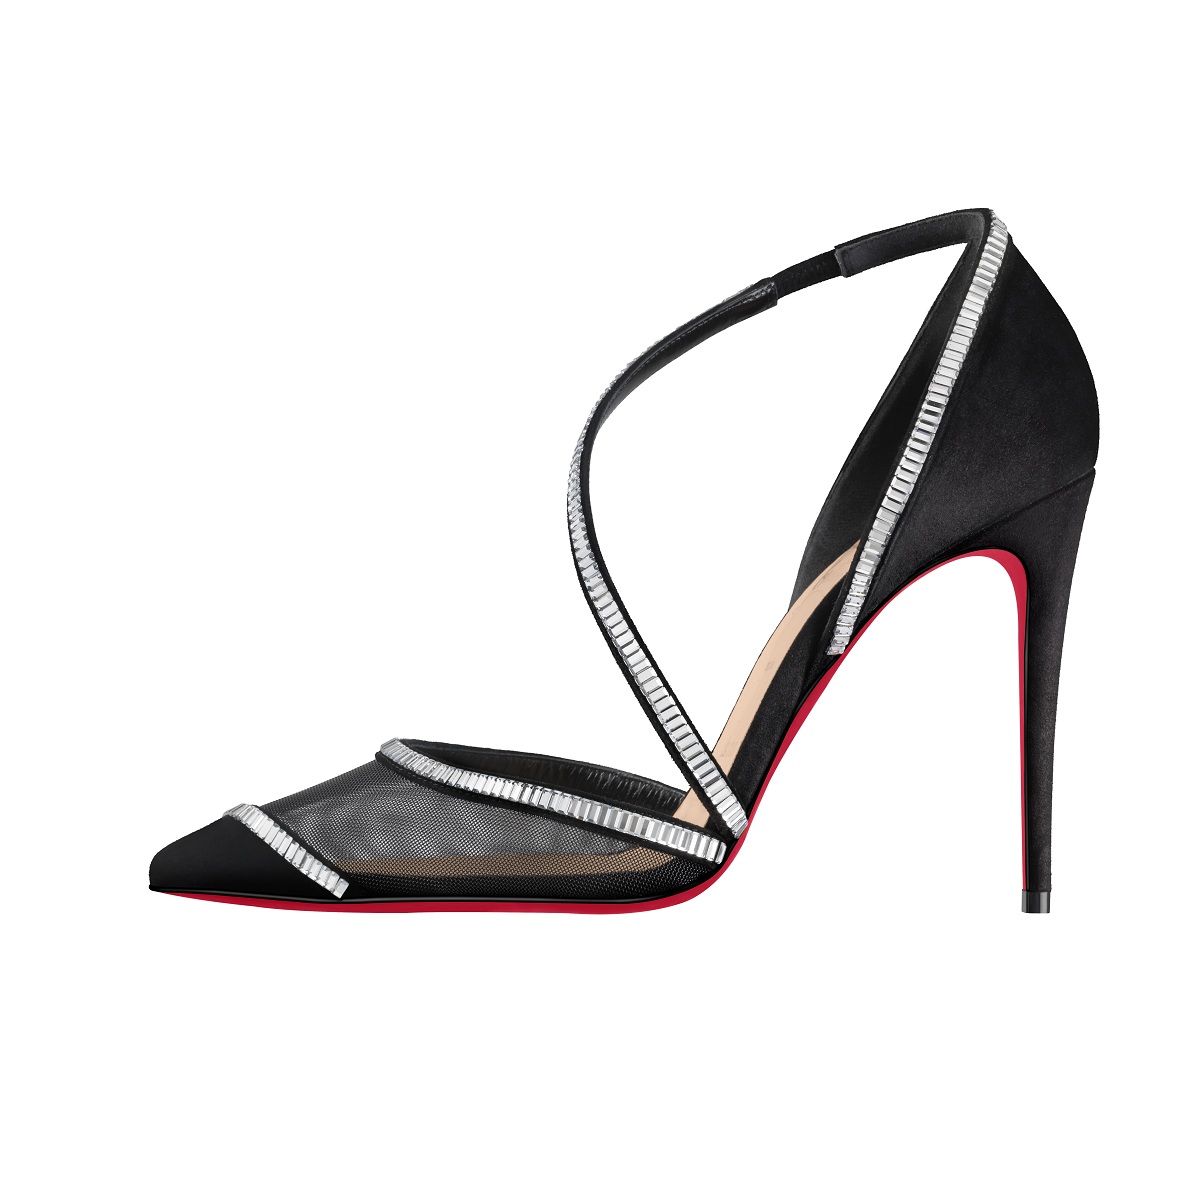 christian louboutin 219 collection